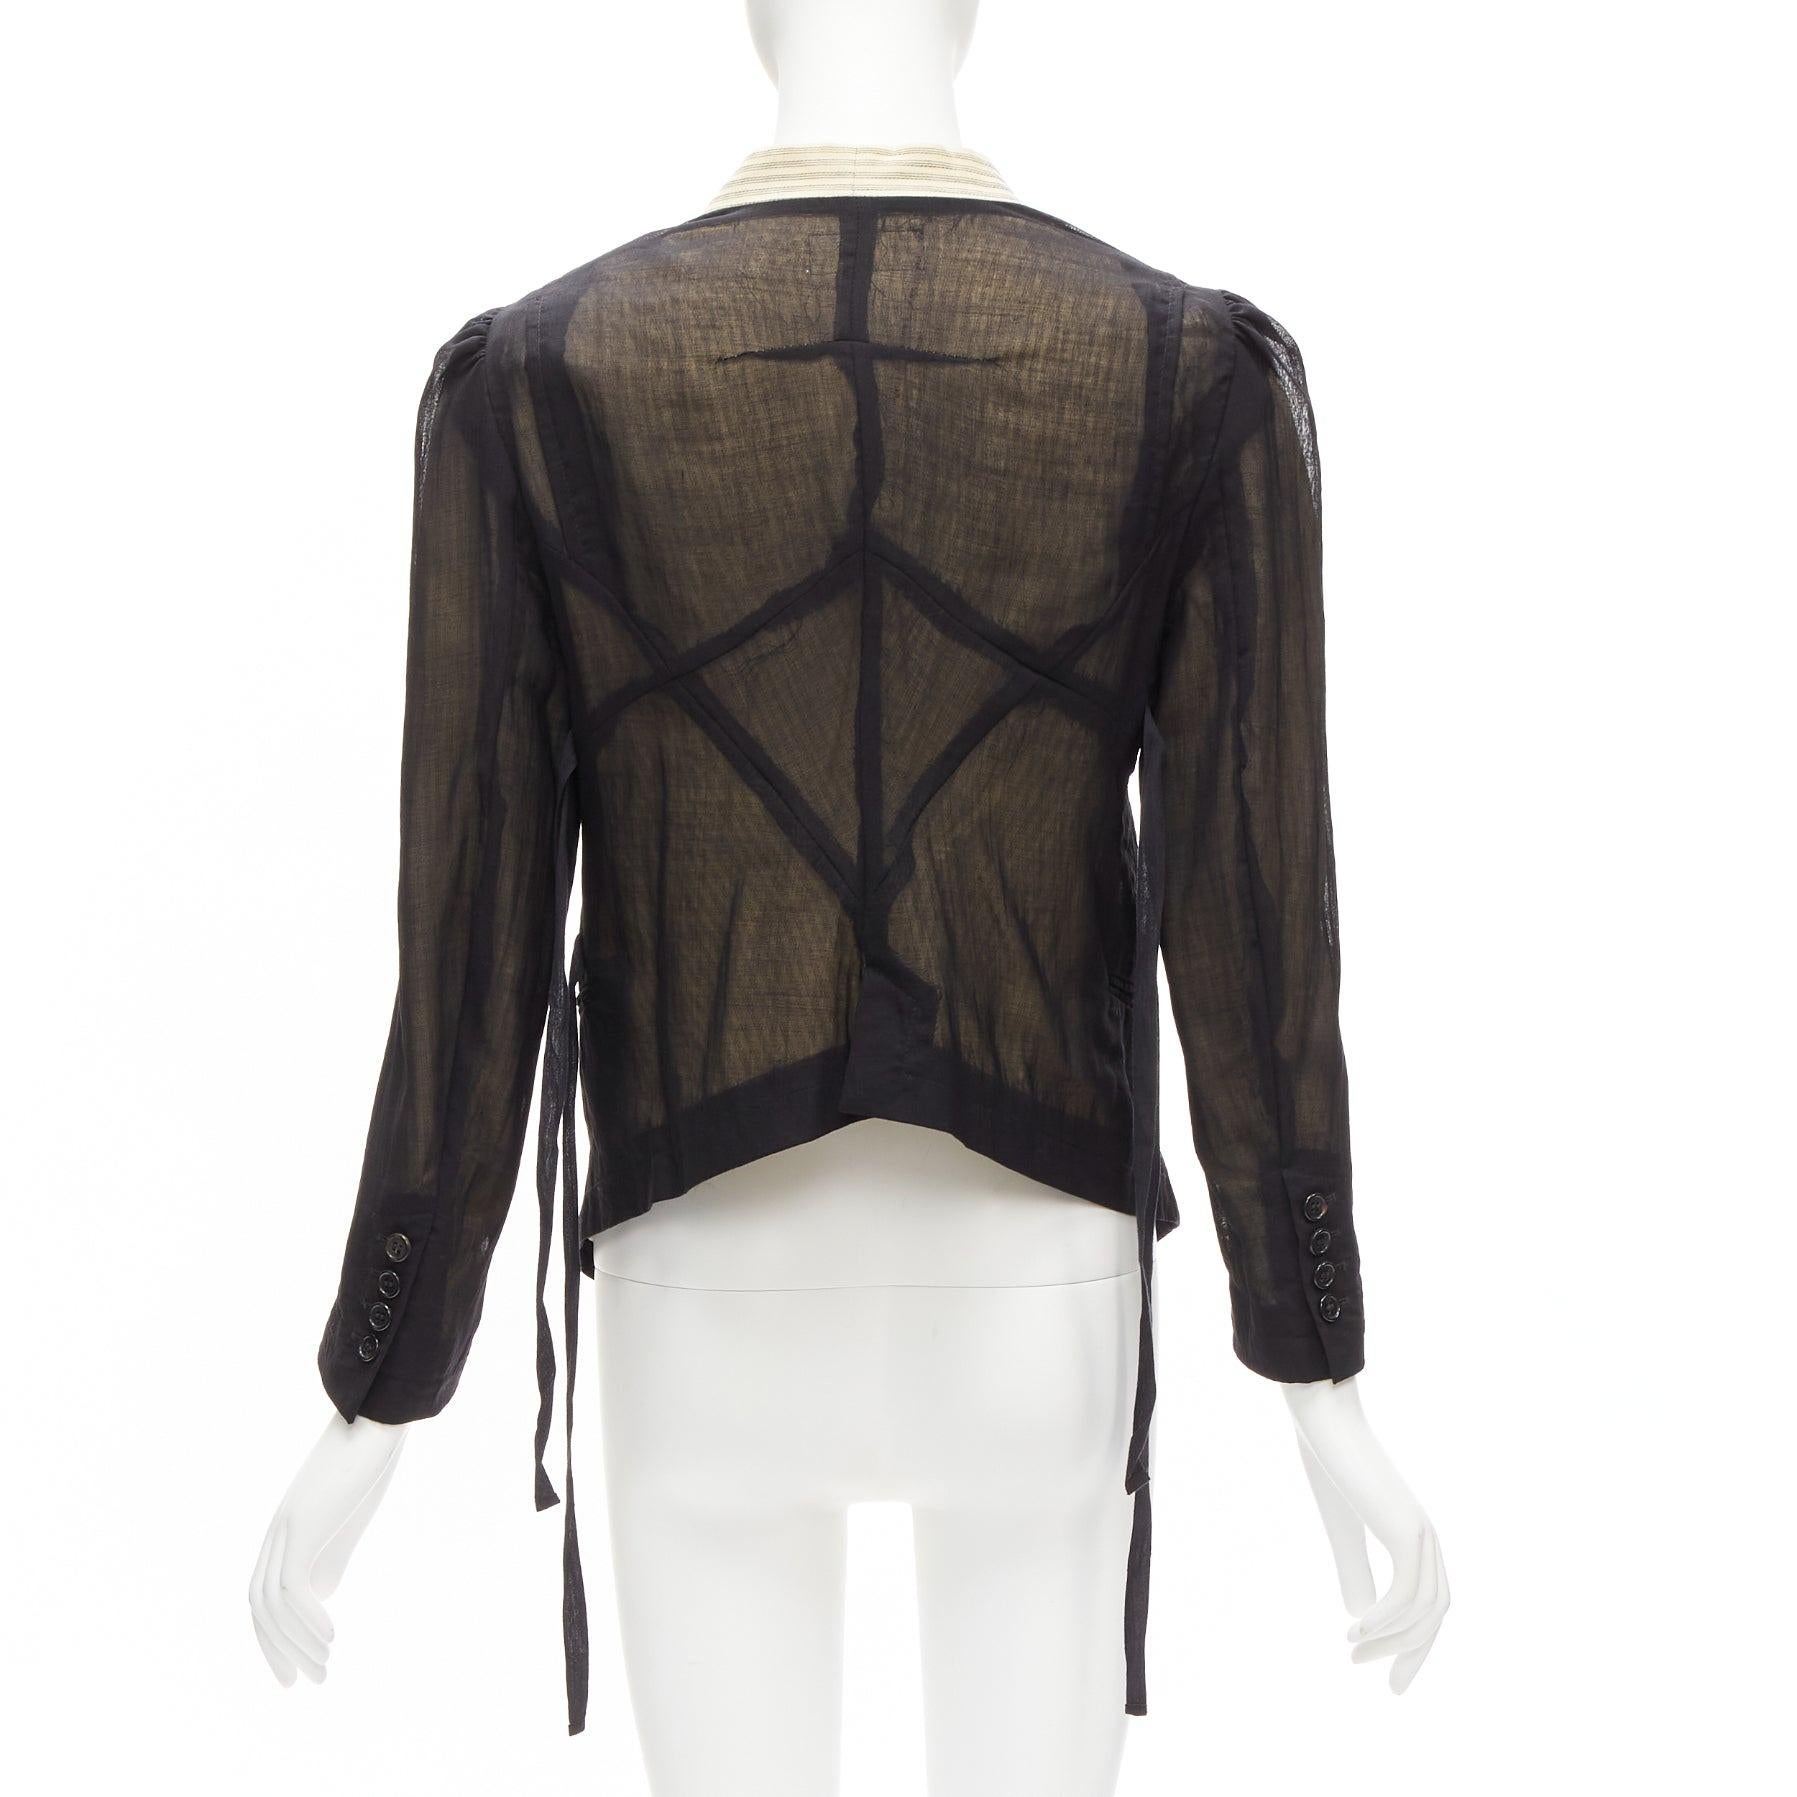 ANN DEMEULEMEESTER black overlay sheer cream topstitched jacket FR36 S For Sale 1